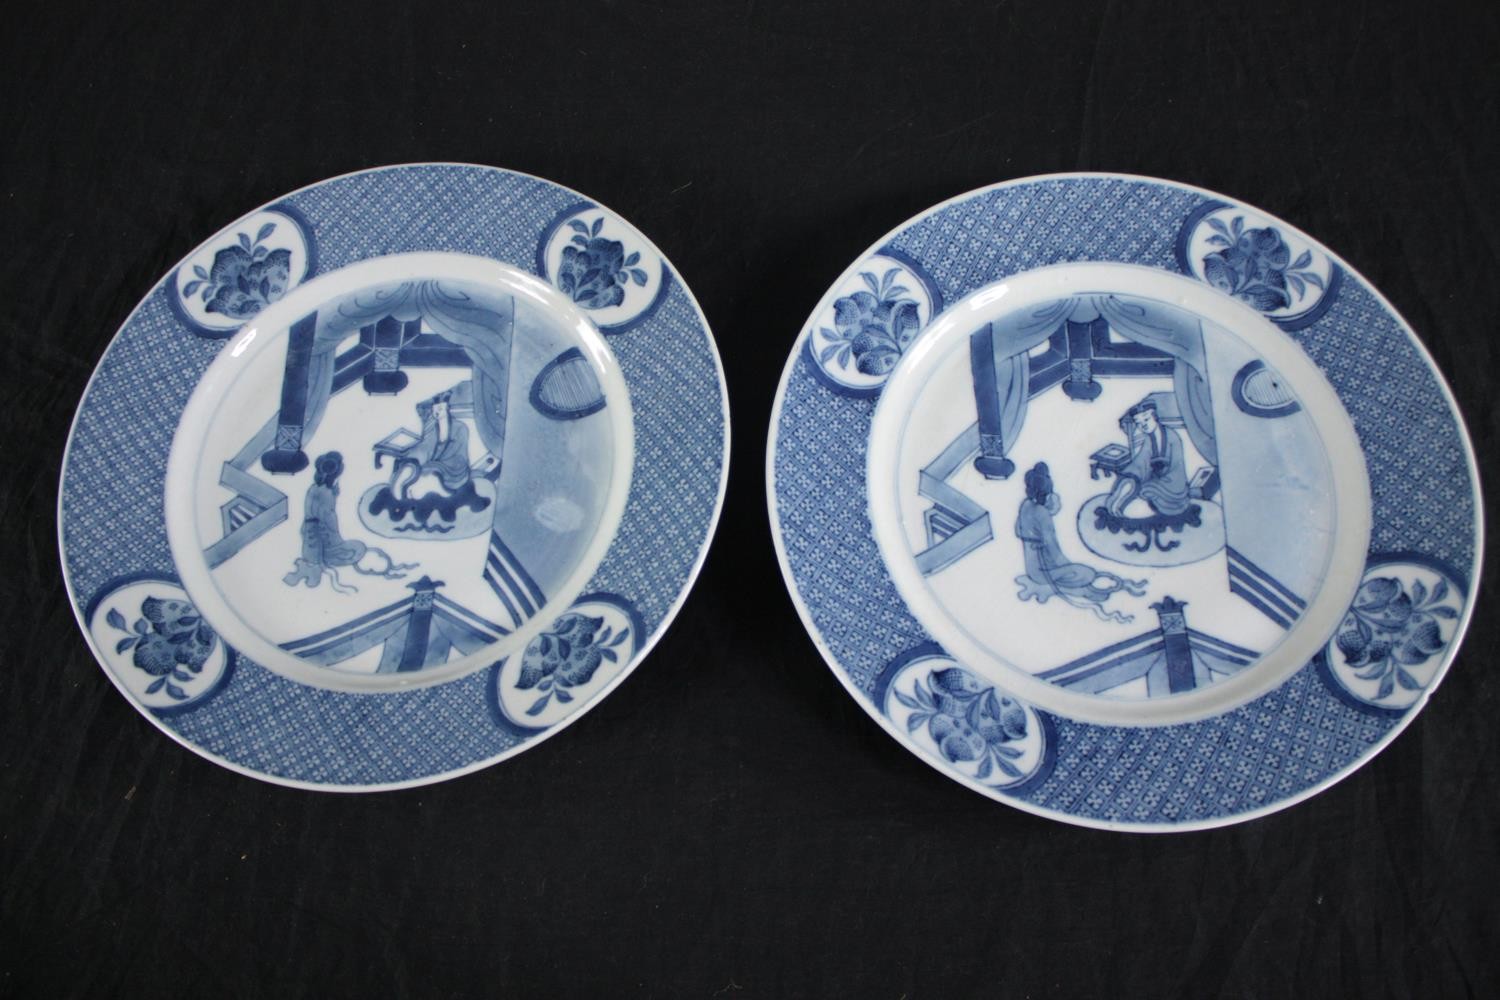 A pair of Qing dynasty Chinese blue and white china plates. Featuring a court scene withing a